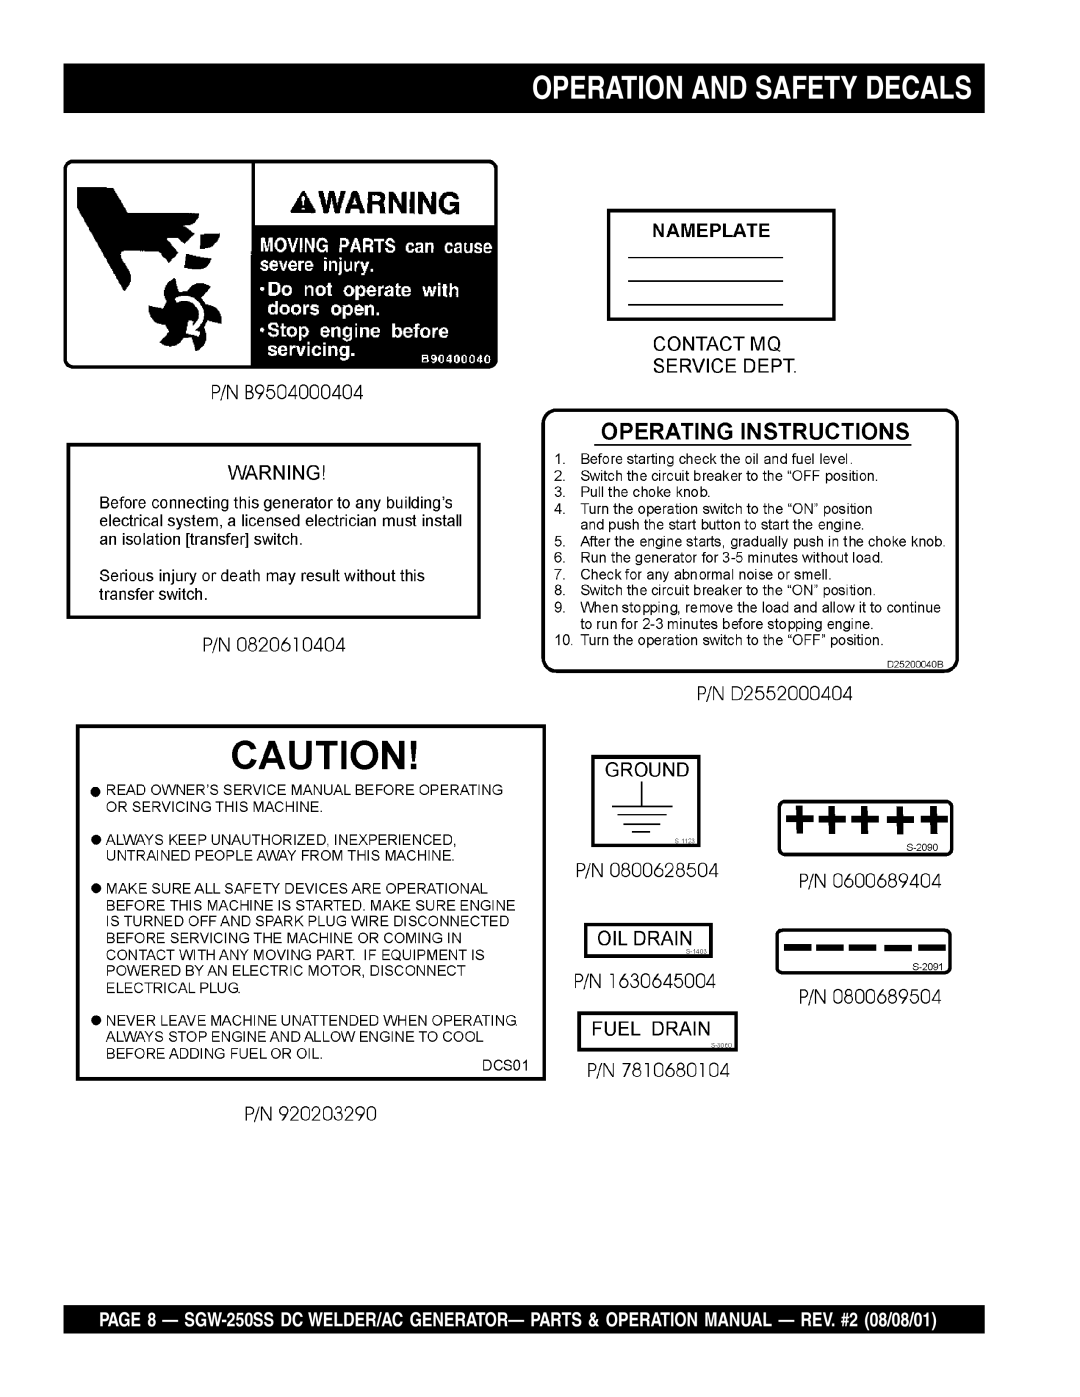 Multiquip SGW-250SS operation manual Operation And Safety Decals 